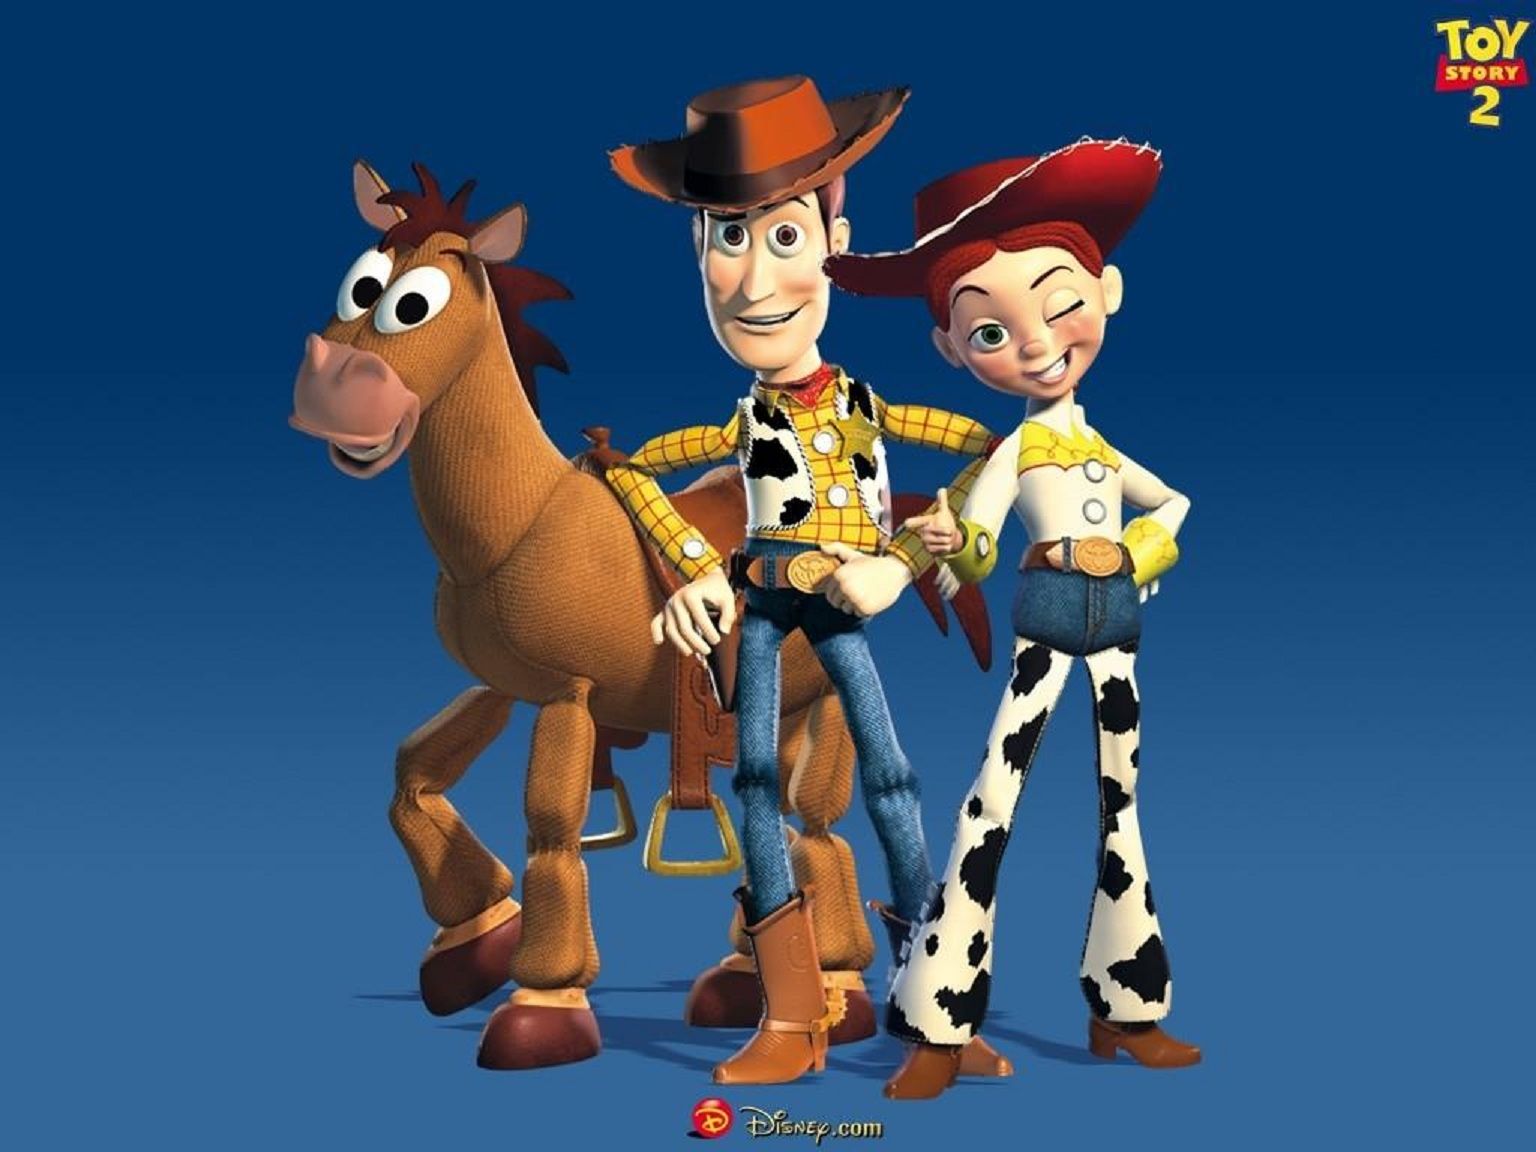 Disney HD Wallpapers Toy Story HD Backgrounds